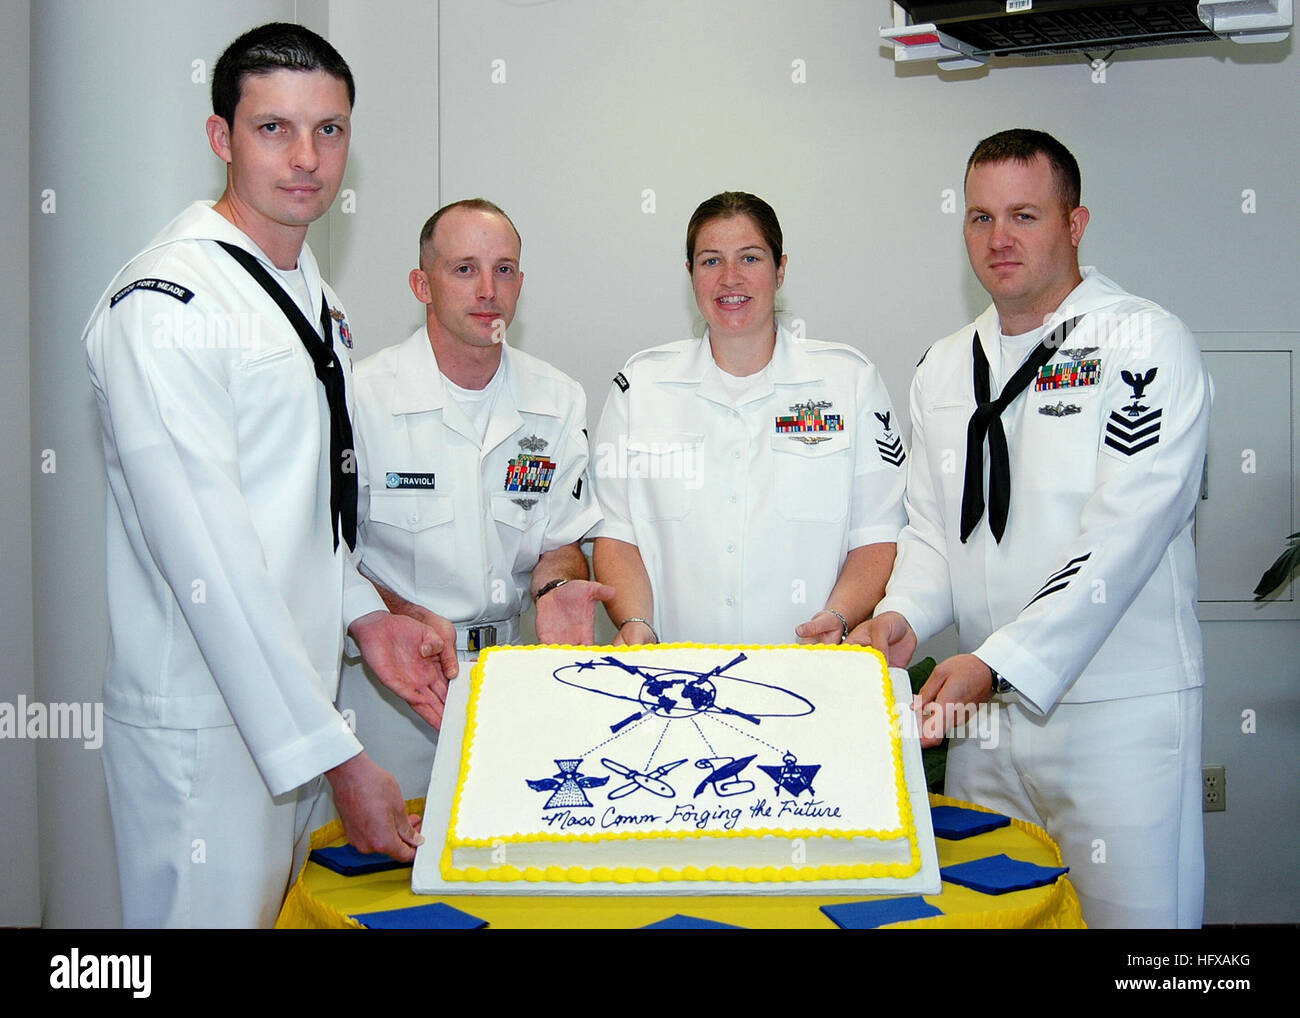 060630-N-5932S-003 Fort George G. Meade, Md. (June 30, 2006) Sailors representing the four media ratings that will officially become the mass communication specialist rating join together to celebrate their rating merger during a cake-cutting ceremony held at the Defense Information School. As of July 1, photographer's mate, lithographer, journalist, and illustrator/draftsman ratings will merge into the Mass Communication Specialist (MC) rating. U.S. Navy photo by Mass Communication Specialist 1st Class Lori A. Steenstra (RELEASED) US Navy 060630-N-5932S-003 Sailors representing the four media Stock Photo